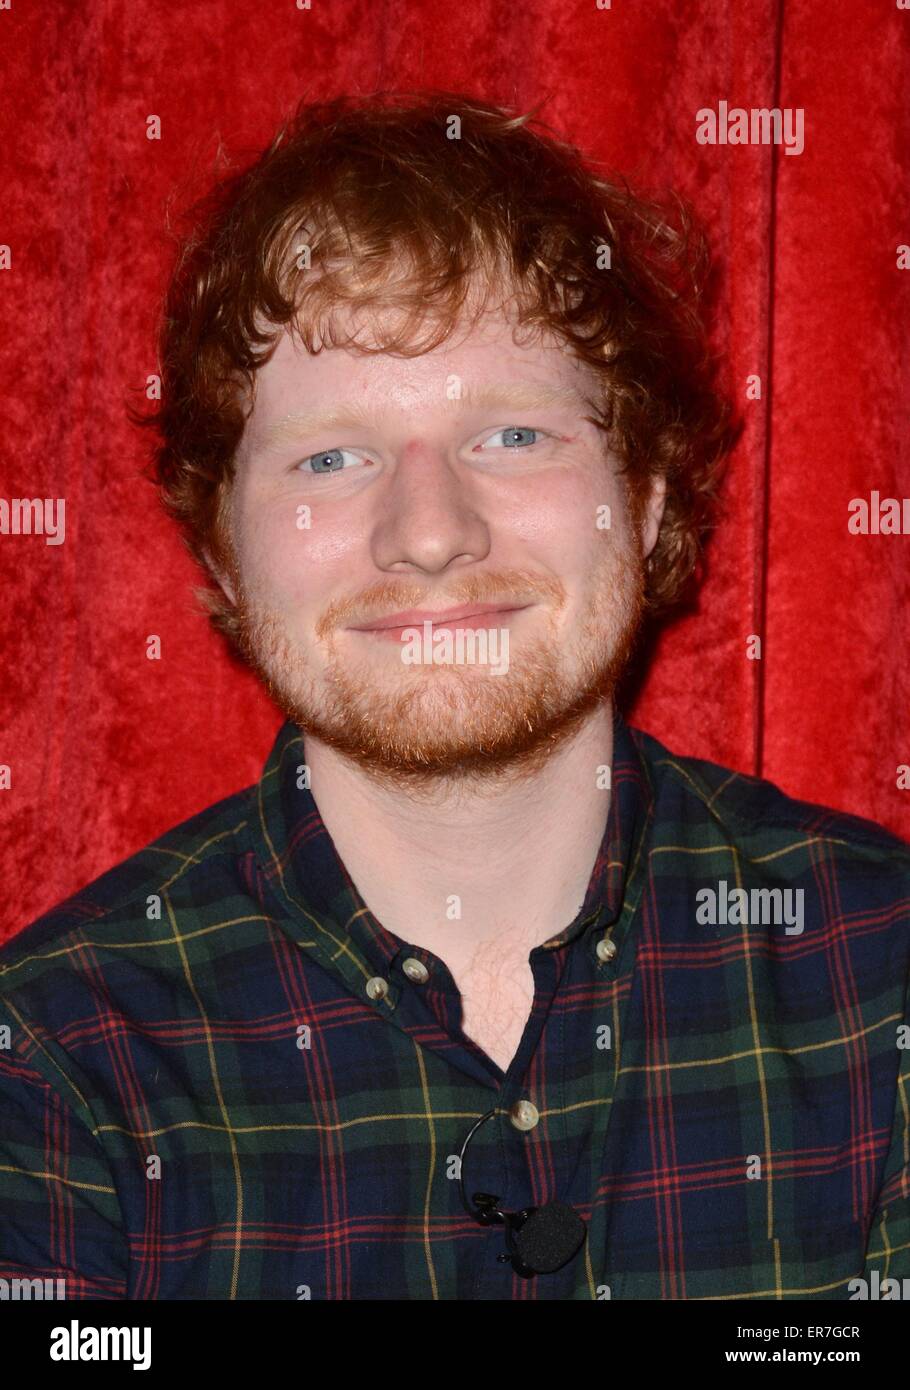 New York, NY, USA. 28th May, 2015. Ed Sheeran at a public appearance for Madame Tussauds Unveils Wax Figure of Ed Sheeran, Madame Tussauds New York, New York, NY May 28, 2015. Credit:  Derek Storm/Everett Collection/Alamy Live News Stock Photo